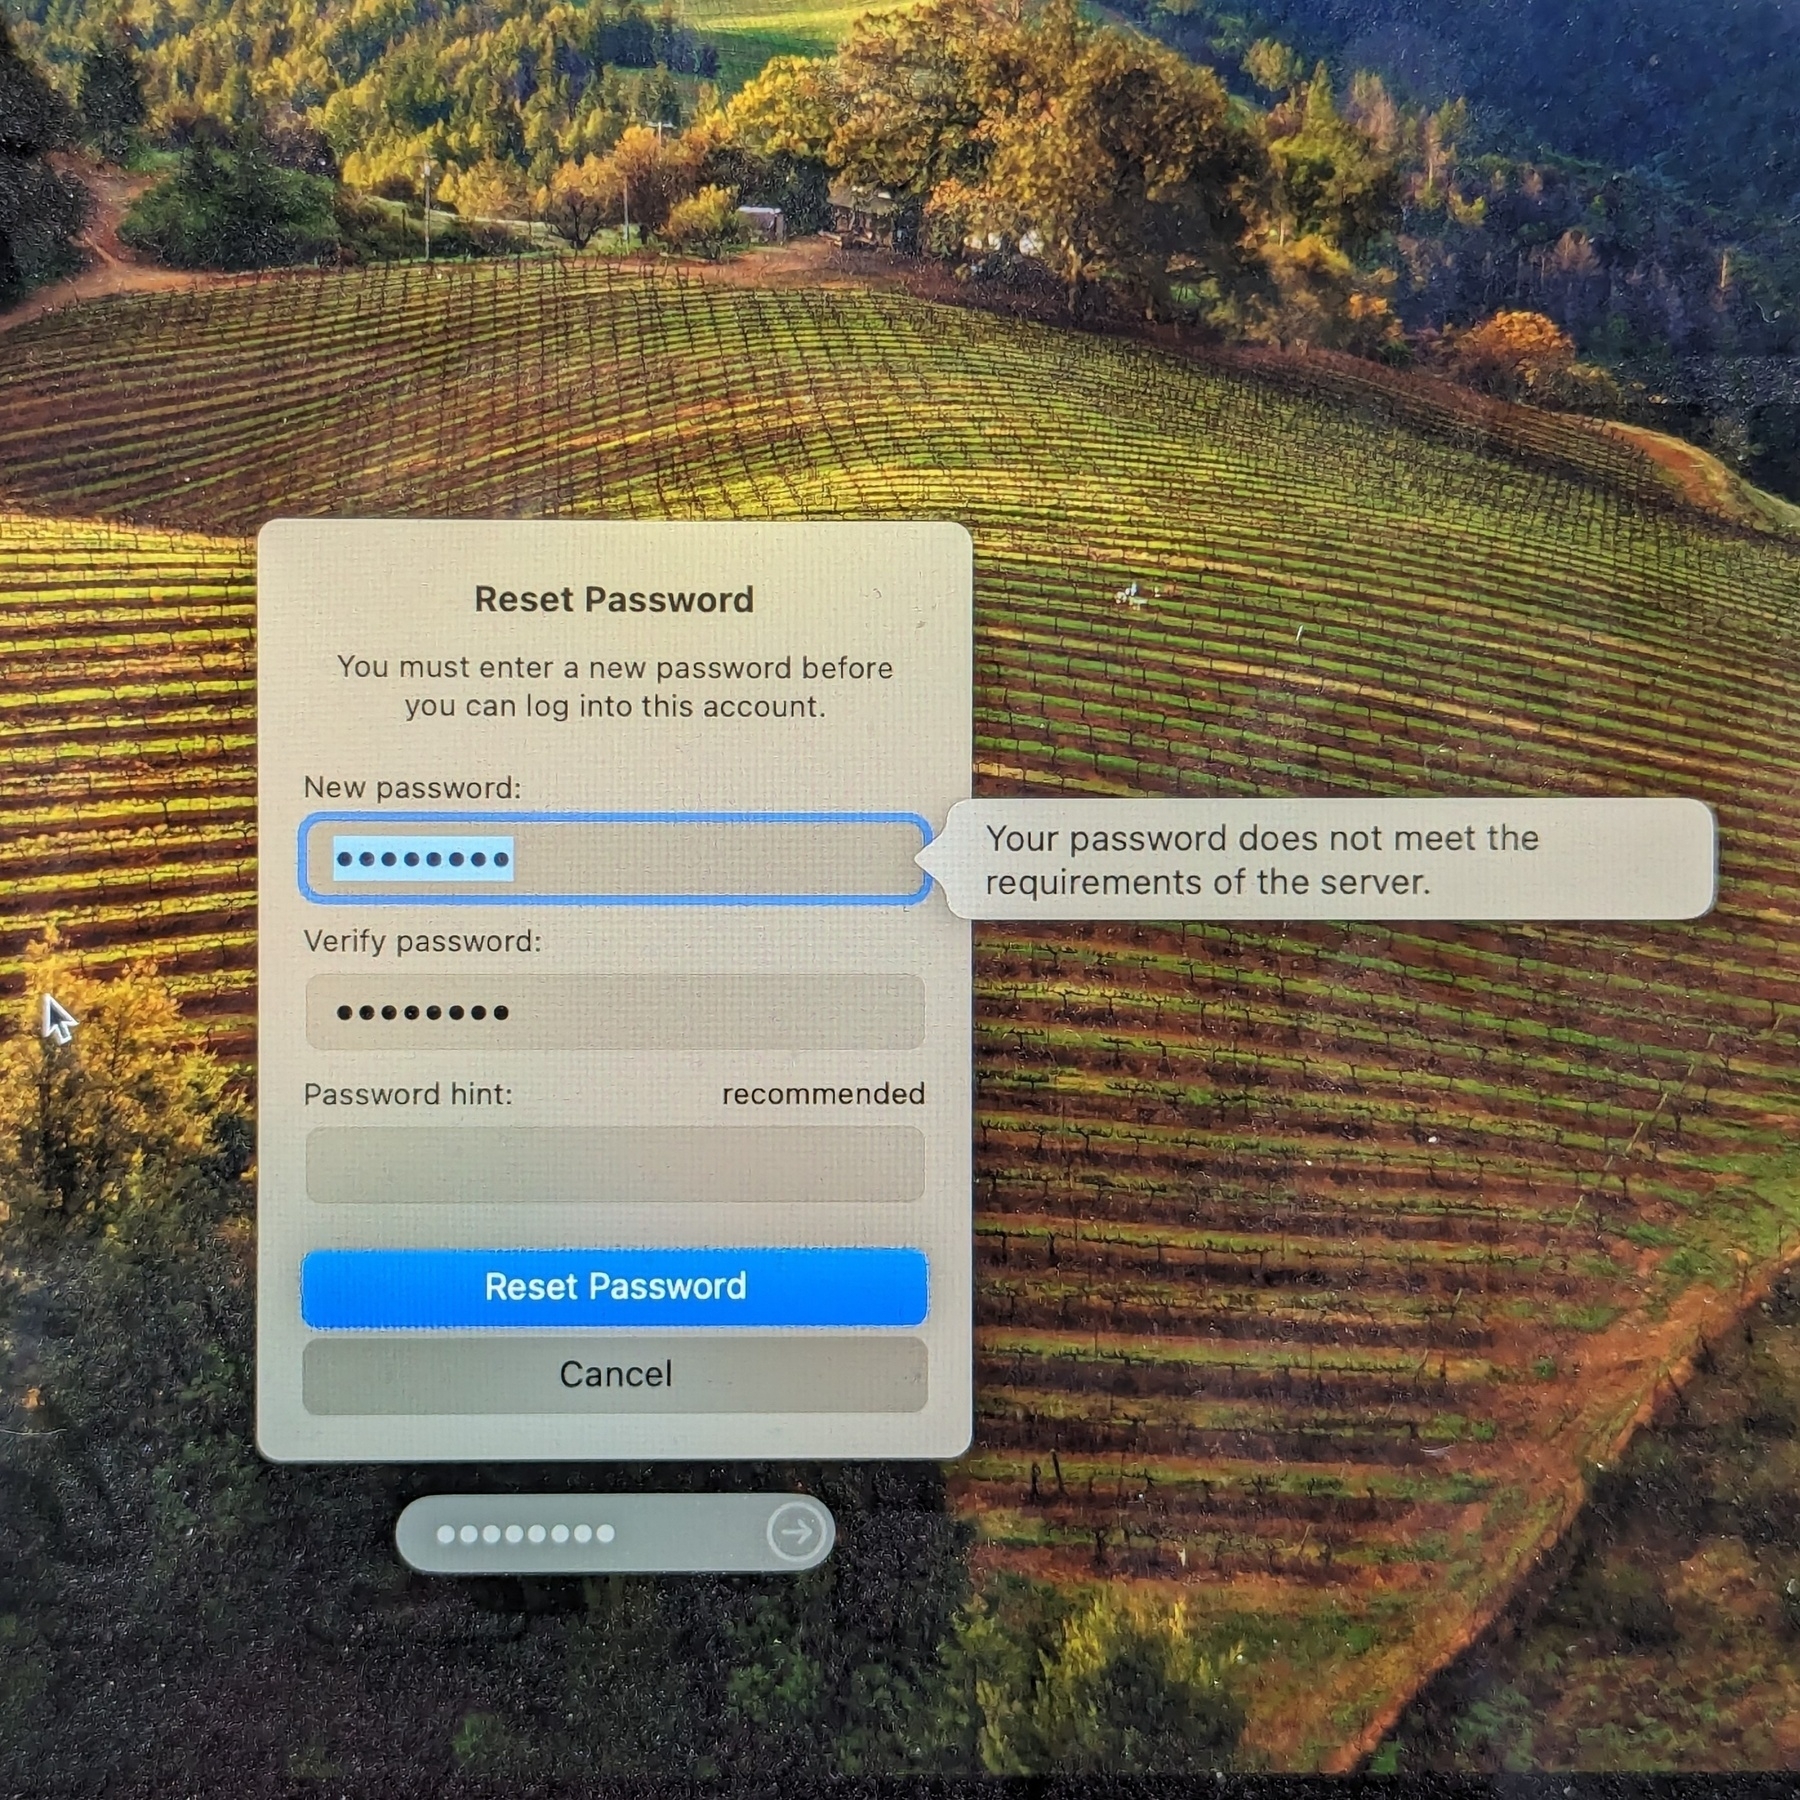 A macOS login reset password modal, partially filled in, with a prompt saying that 'your password does not meet the requirements of this server' without saying what the requirements are.